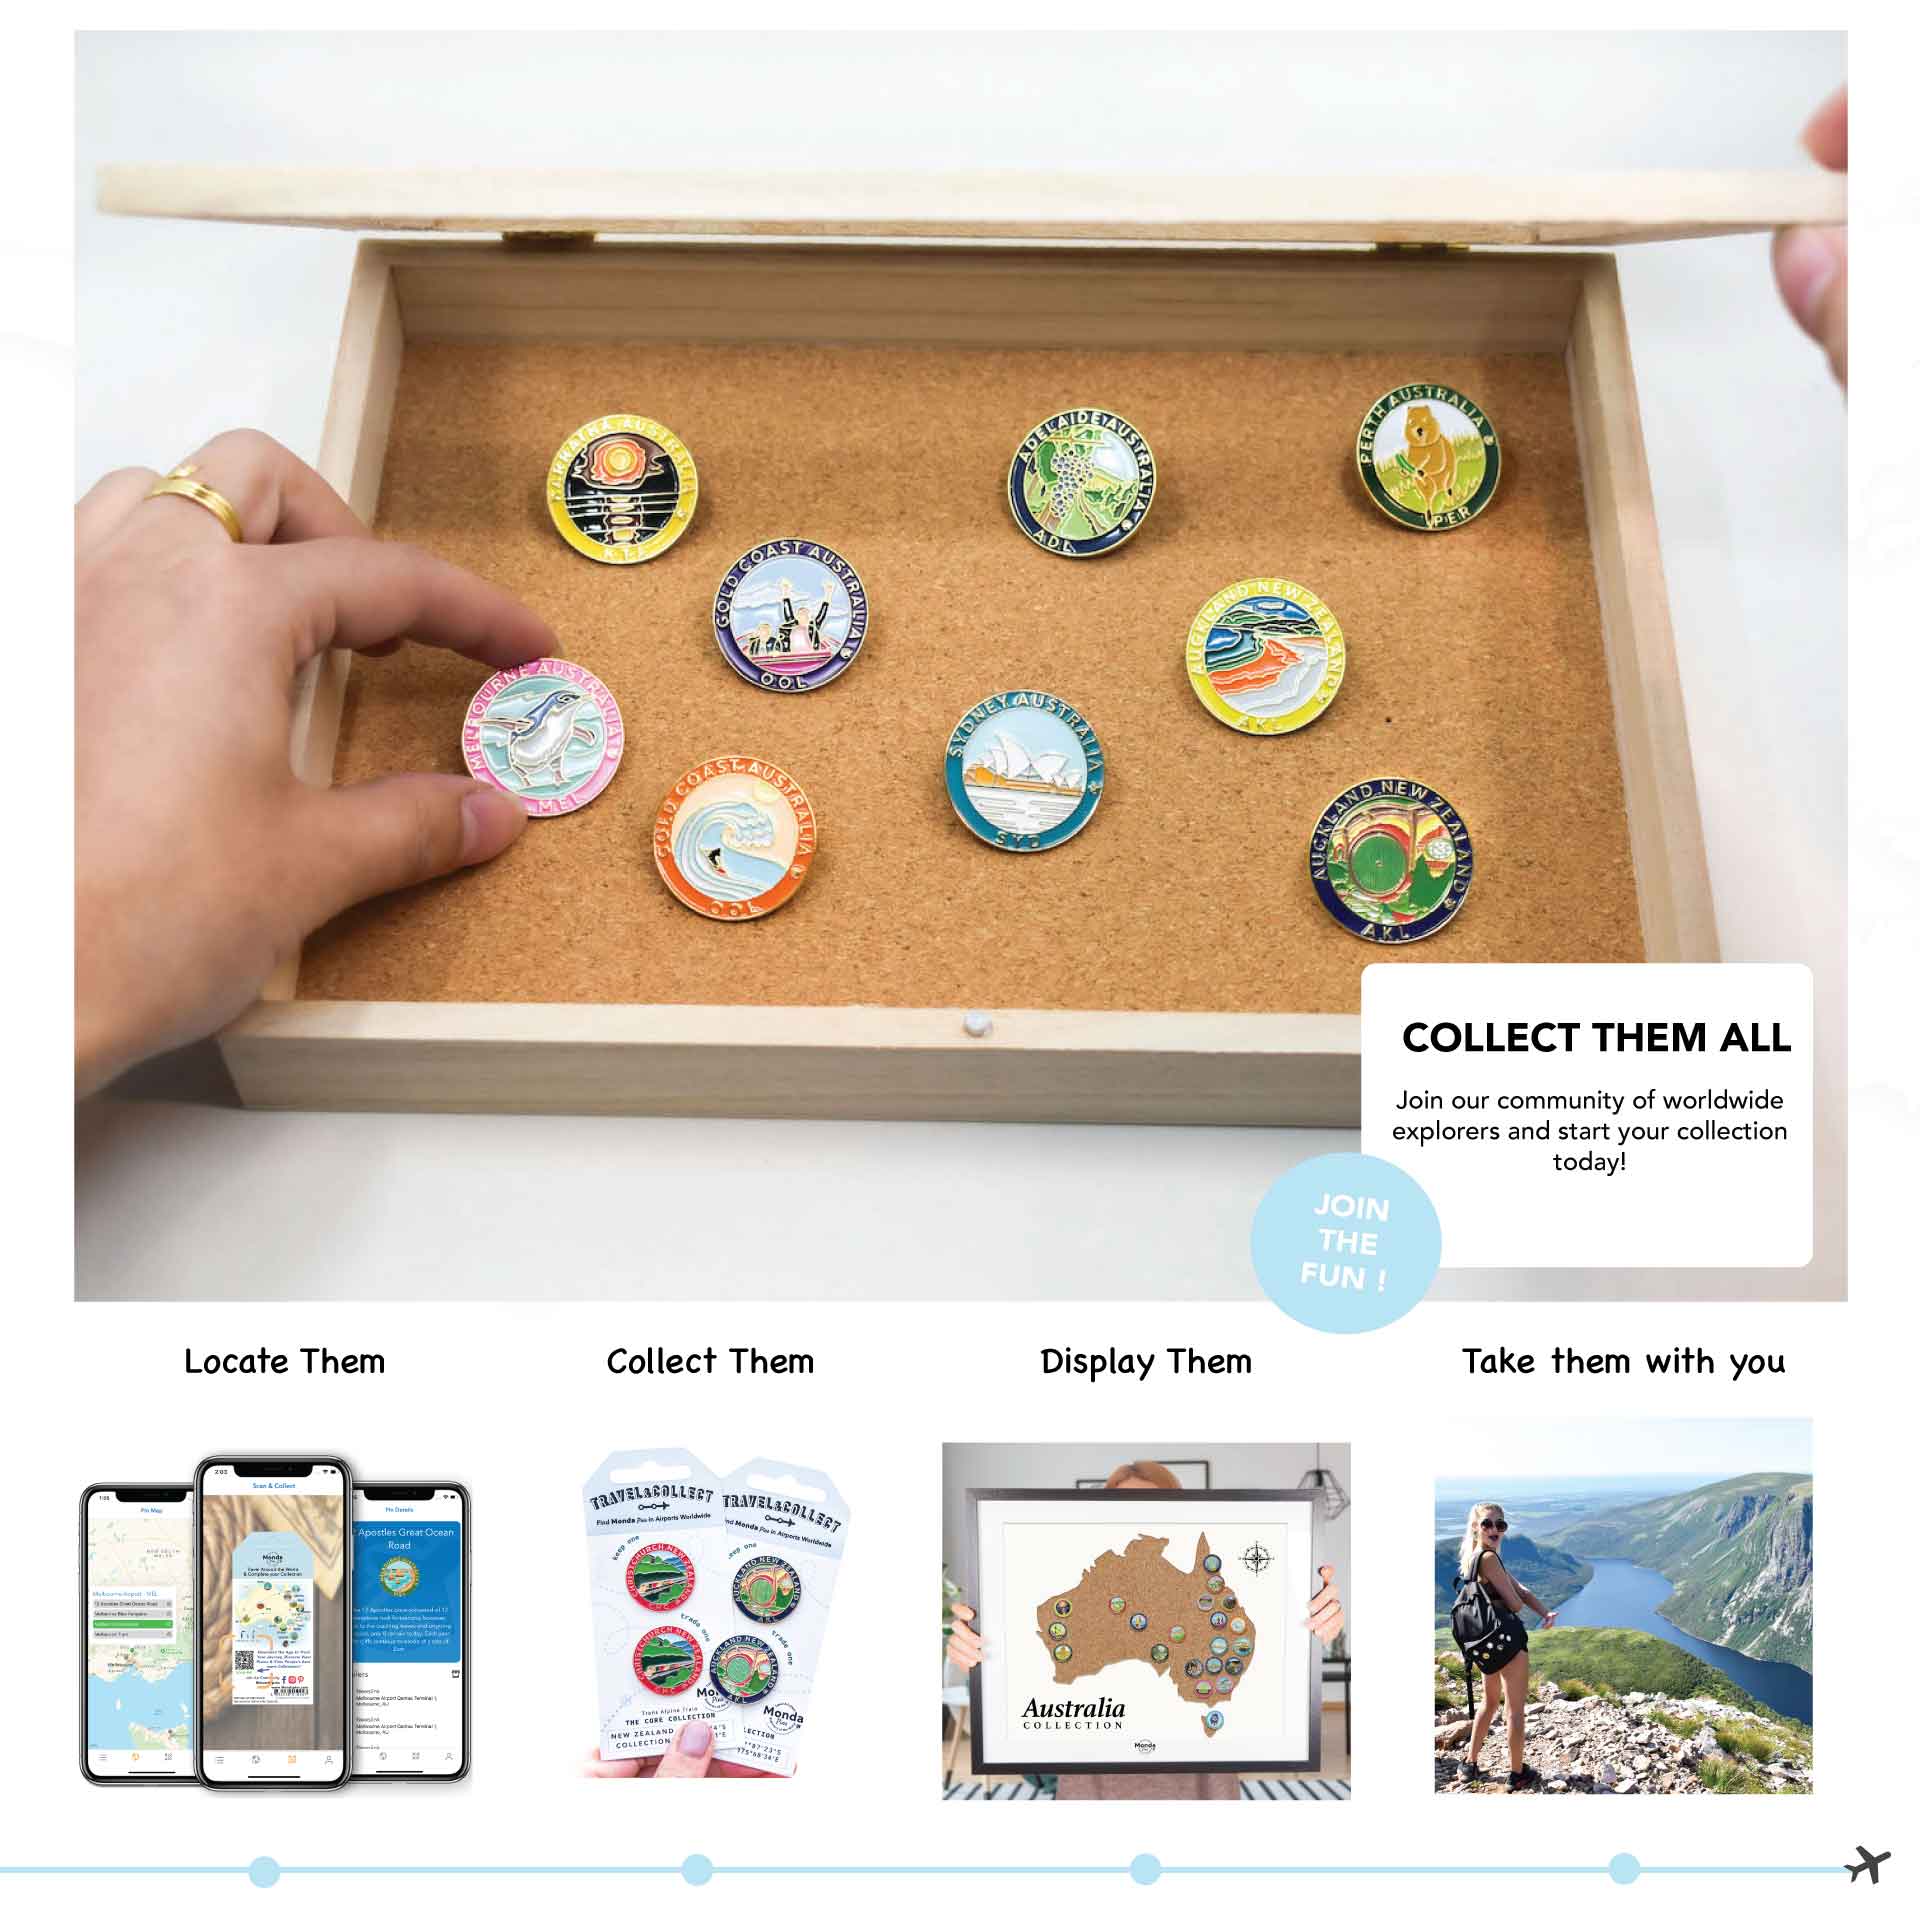 Collect all the pins - locate pins, collect them, display pin collection and take pins with you on travel backpack